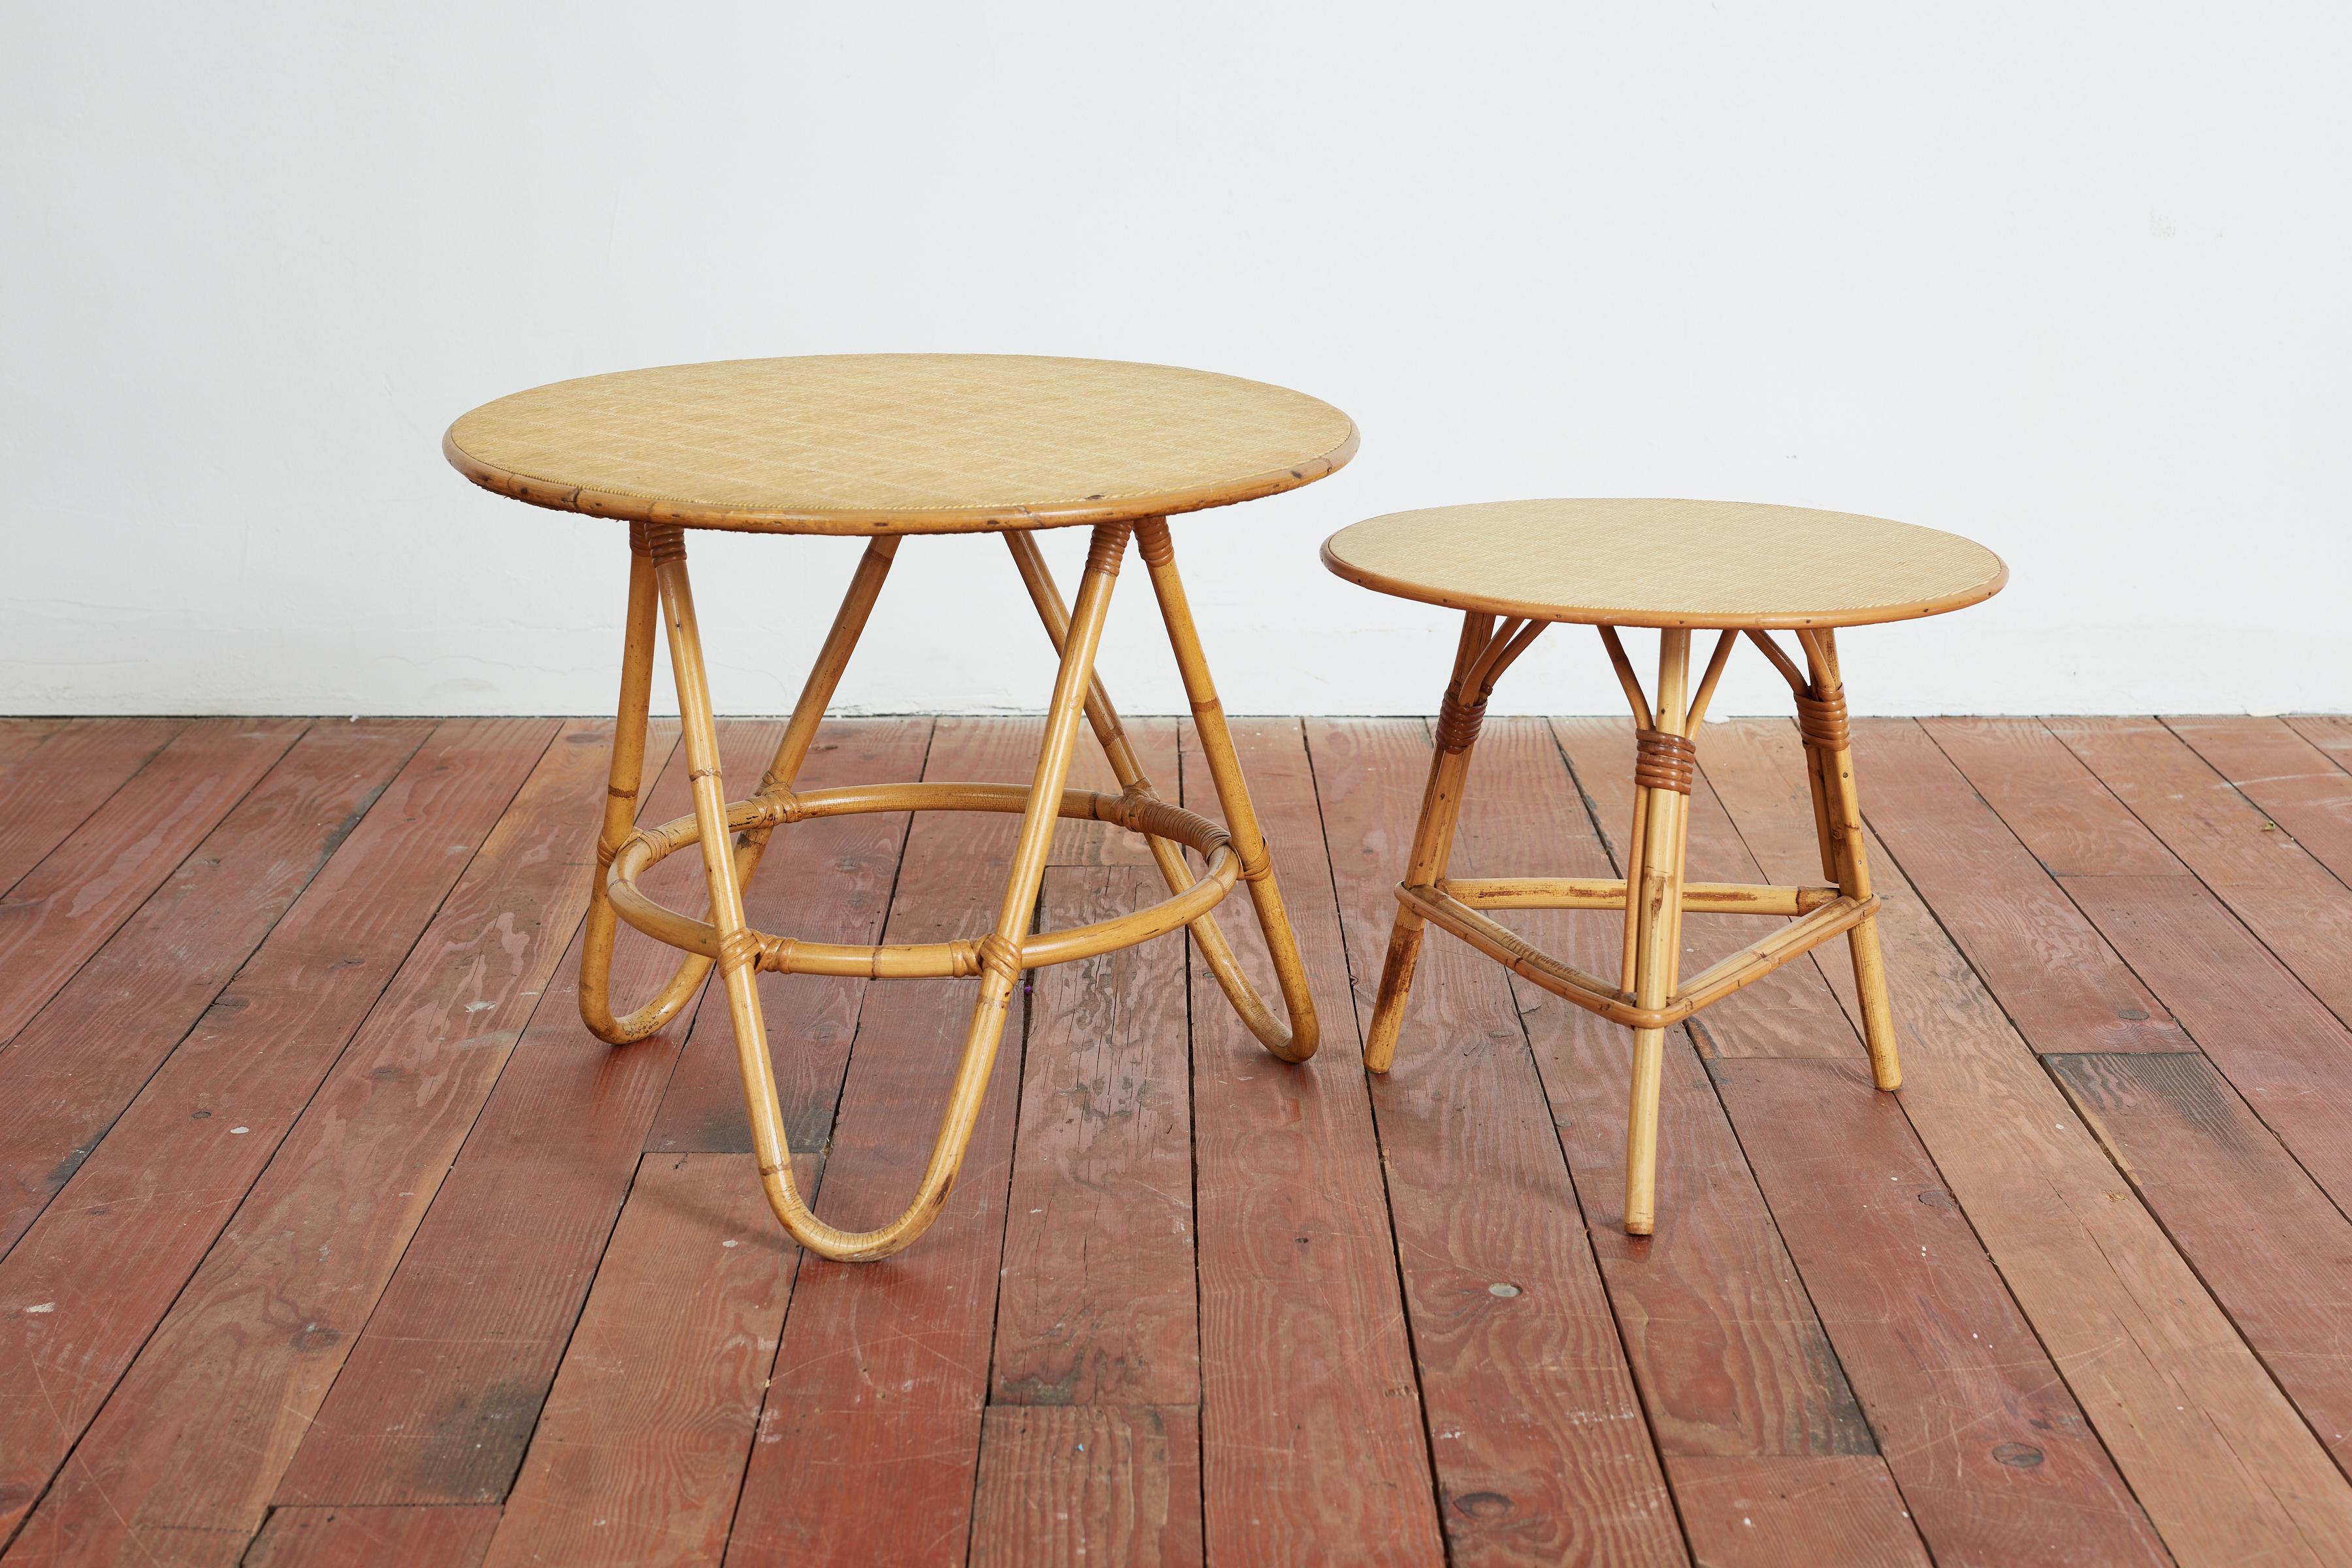 Pair of Italian bamboo nesting tables with interesting bases and woven bamboo tops. 
Italy, 1950s 
Priced as a set 

small table: 16